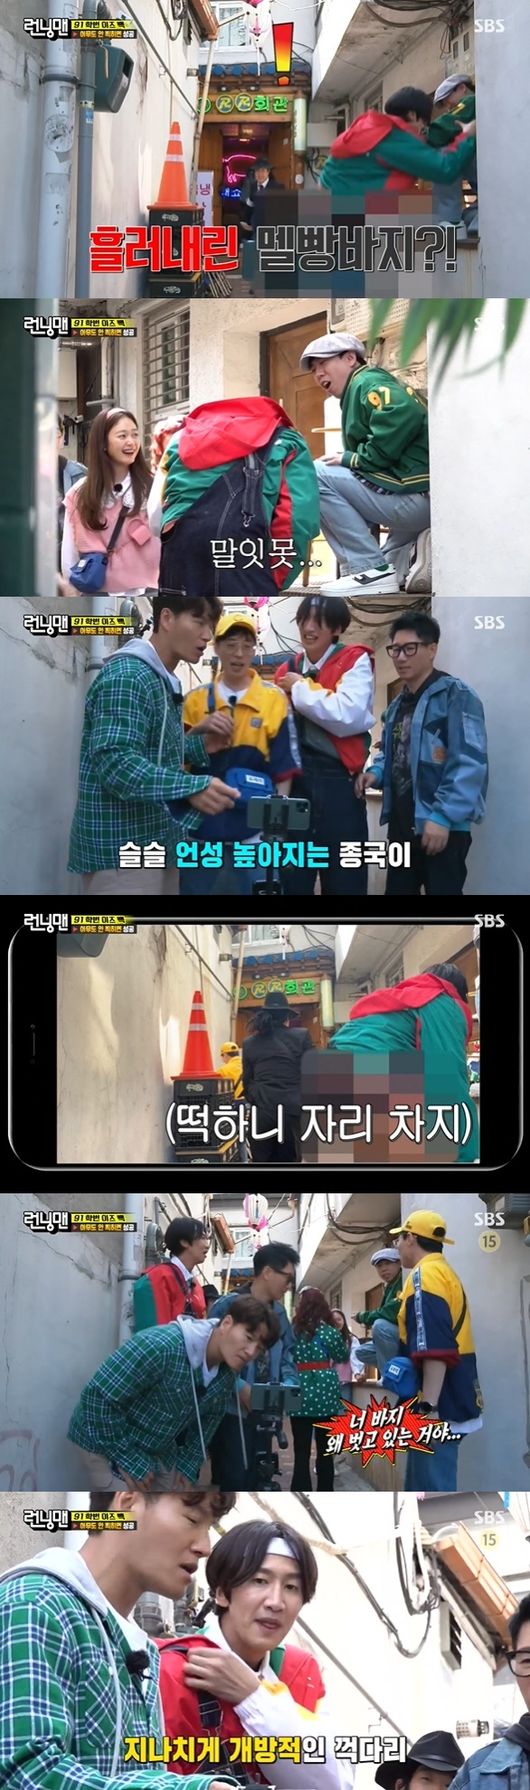 Lee Kwang-soo was exposed to underwear when the Trousers flowed down during the game.SBS entertainment Running Man, which was broadcasted on the afternoon of the afternoon, was decorated with 91th Izu Bag after last week.The third memorable place was the frozen pork belly shop, and then moved nearby to perform the next mission.The mission is to hide in three seconds and not have members in the group photo.Every time the Running Man members failed, the gifts disappeared one by one, and they practiced practice to keep the gifts.If you succeed now, you can get seven gifts, and a three-second start started.But at this time, Lee Kwang-soo was trying to hide behind the wall with Yang Se-chan when the big suspenders flowed down.The members and crew became shock ice because of the suddenly descending Trousers, and Lee Kwang-soo raised the Trousers again at super high speed.The production team laughed at Lee Kwang-soos lower body by mosaicing.Lee Kwang-soo wasted three seconds to raise the Trousers, and his lower body was captured naked in the photographs taken.Yoo Jae-Suk asked, Why are you taking off the Trousers? Lee Kwang-soo said, This is down.Running Man screen captures